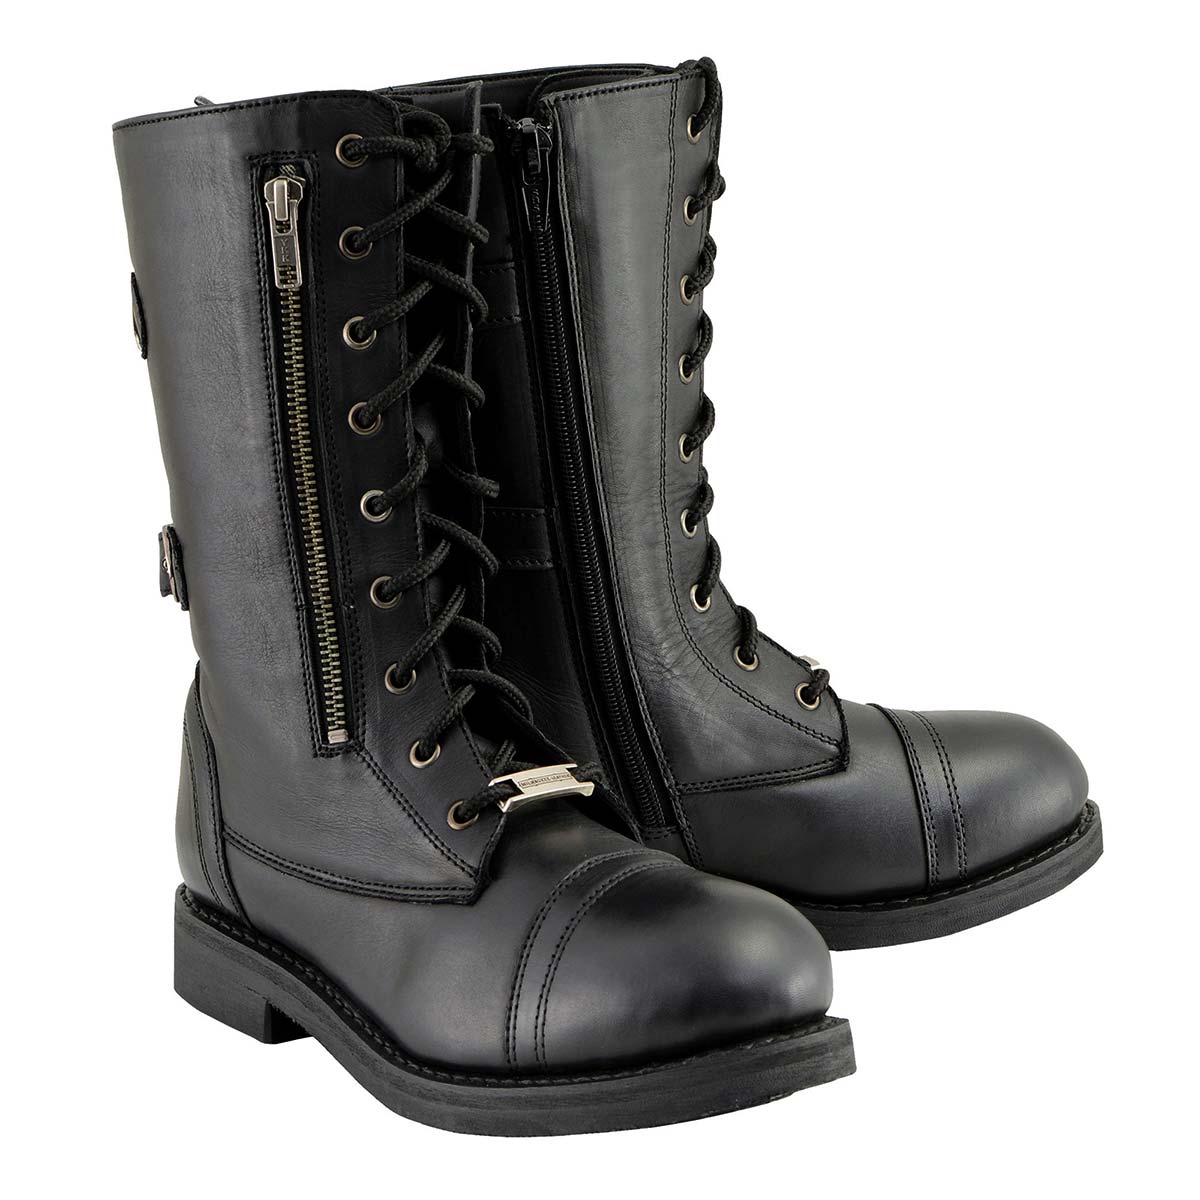 Milwaukee Leather MBL9369 Women's ‘Graze’ Black Leather Lace-Up Motorcycle Boots with Zipper Pocket